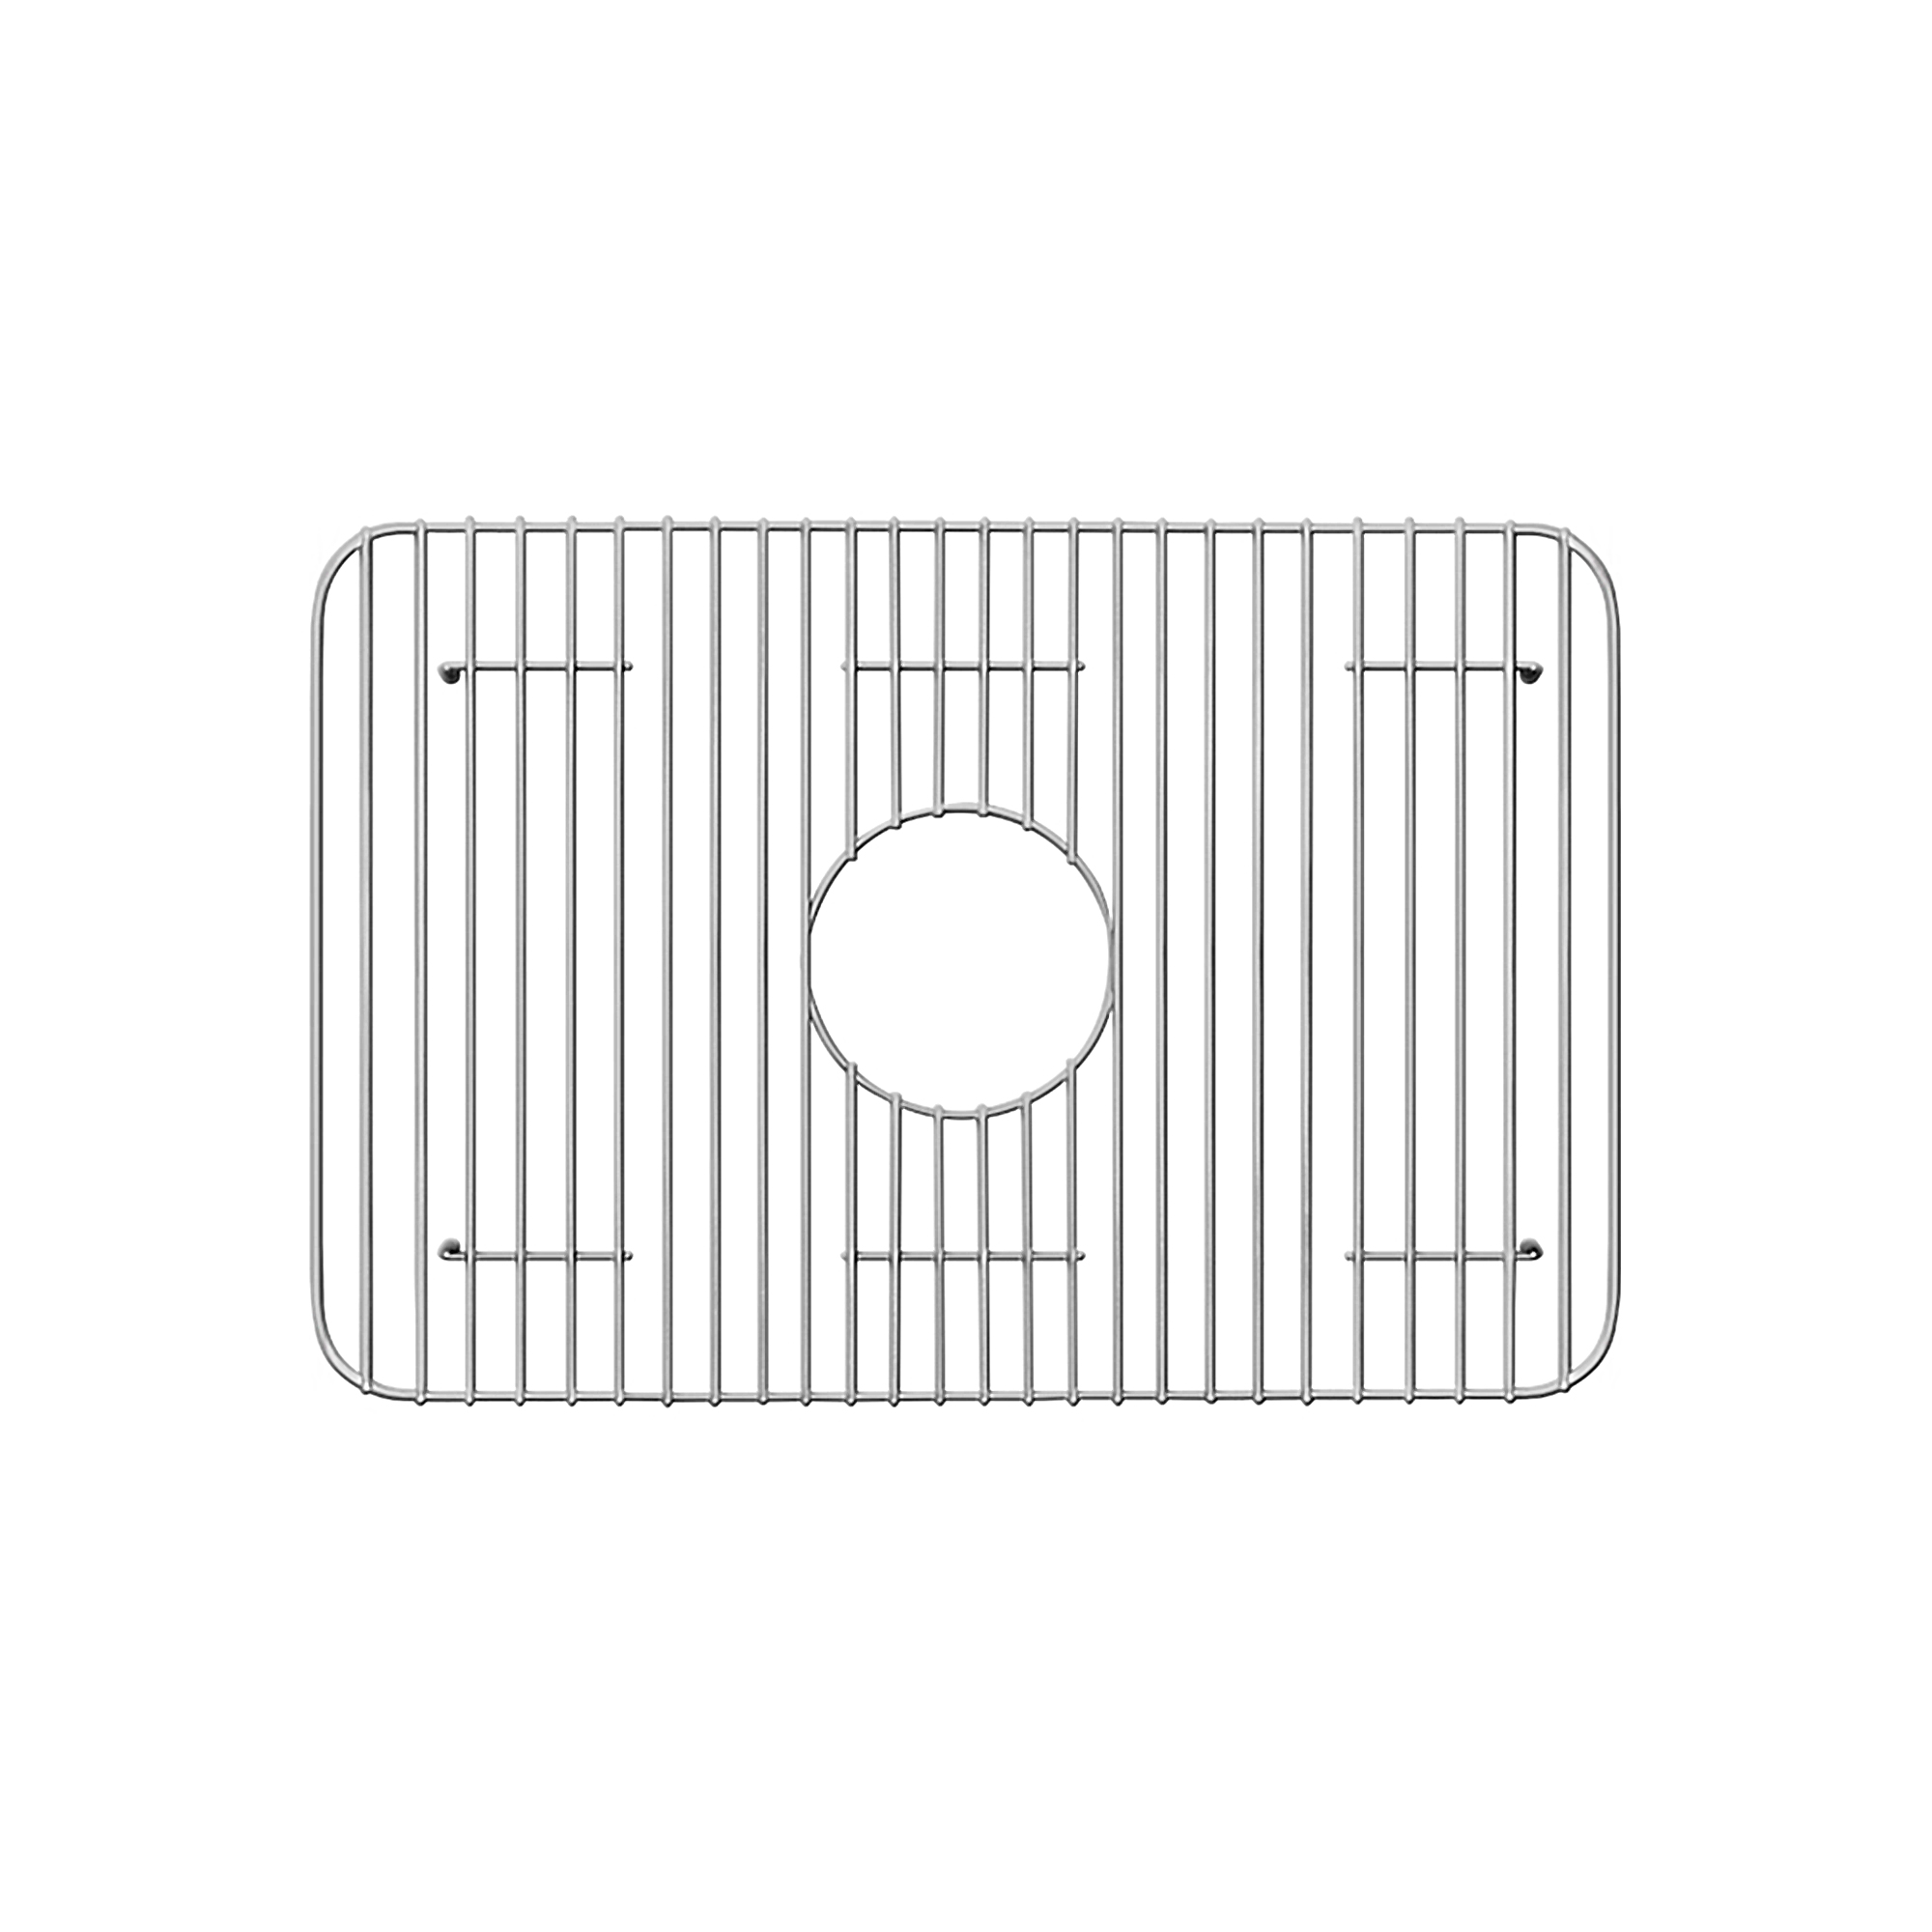 Stainless Steel Sink Grid for use with Fireclay Sink Model WHPLCON3319